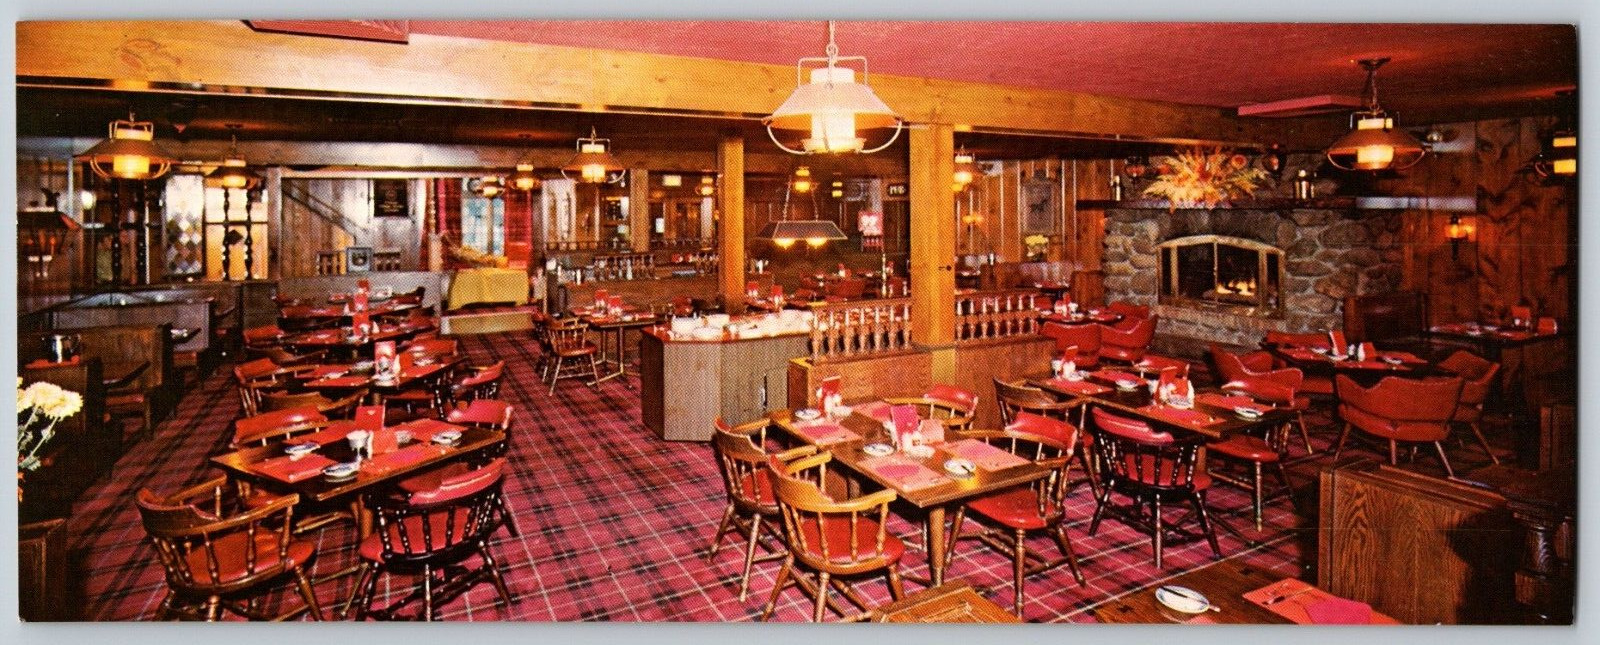 Red Coach Grill Boston Massachusetts MA Restaurant Dining View Ad Postcard